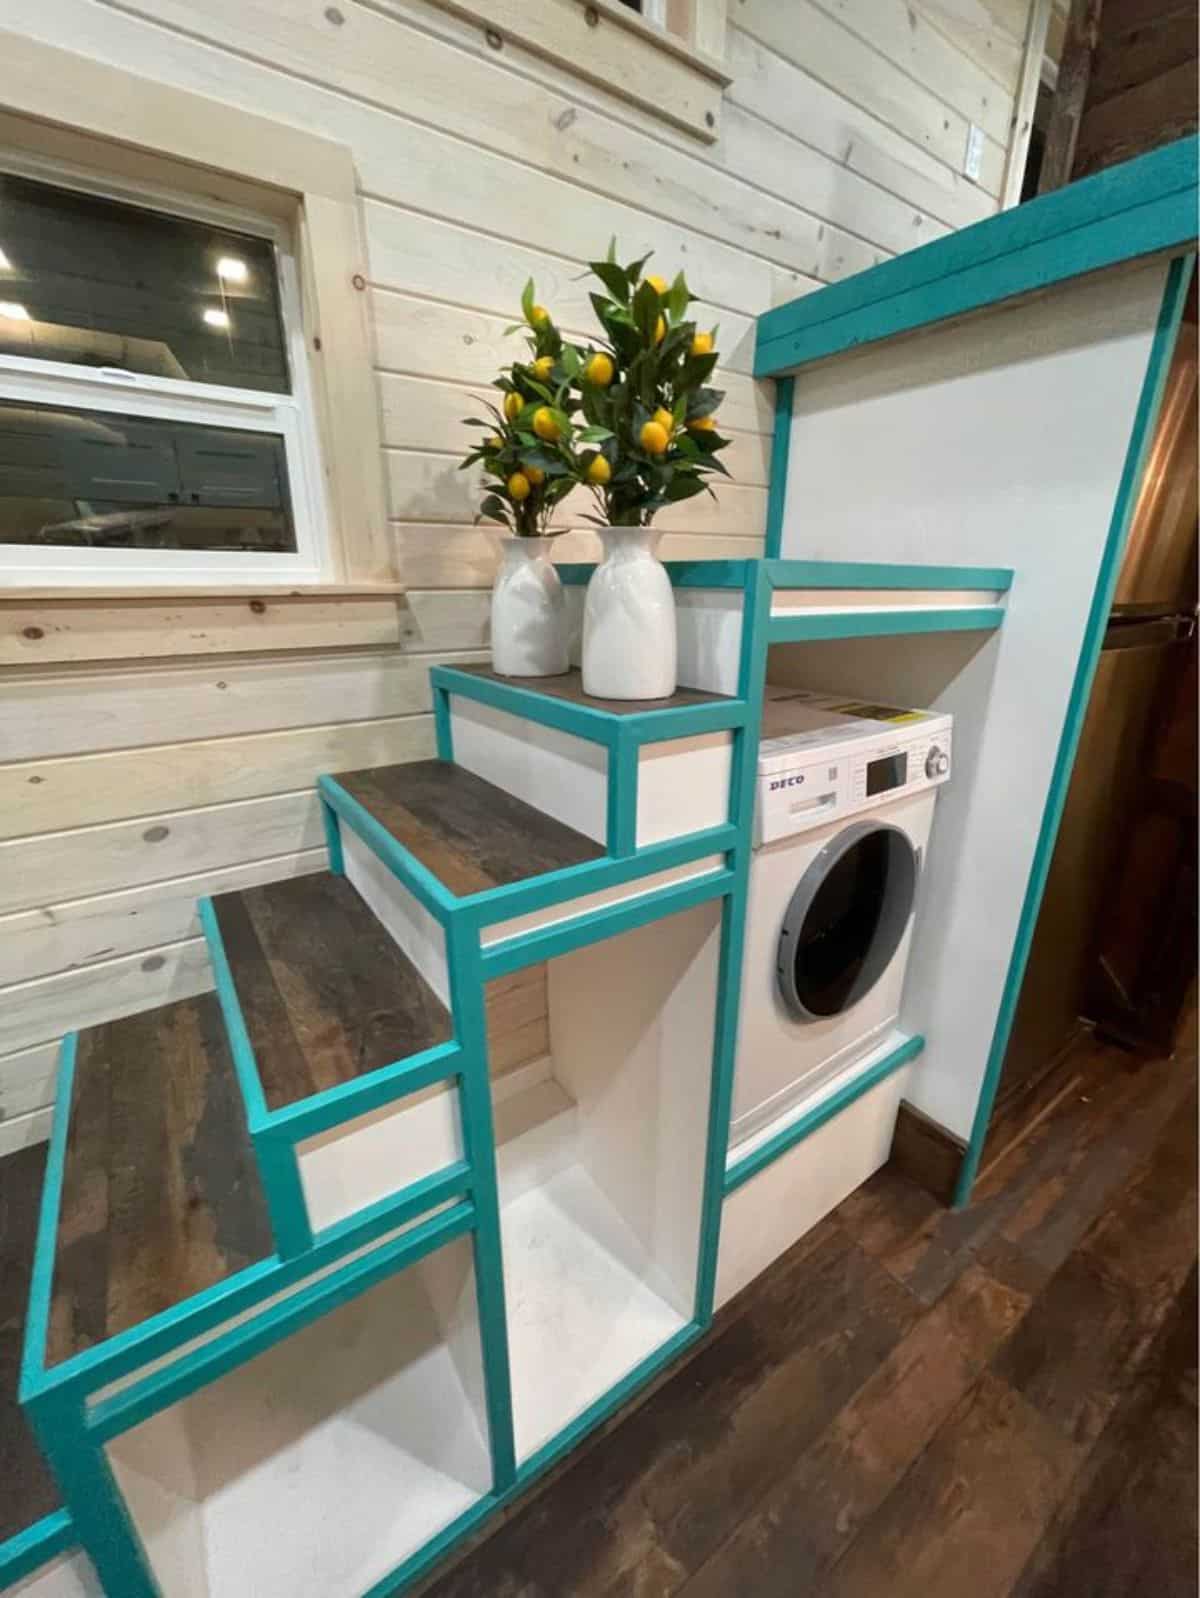 Multipurpose stairs with washer dryer combo underneath